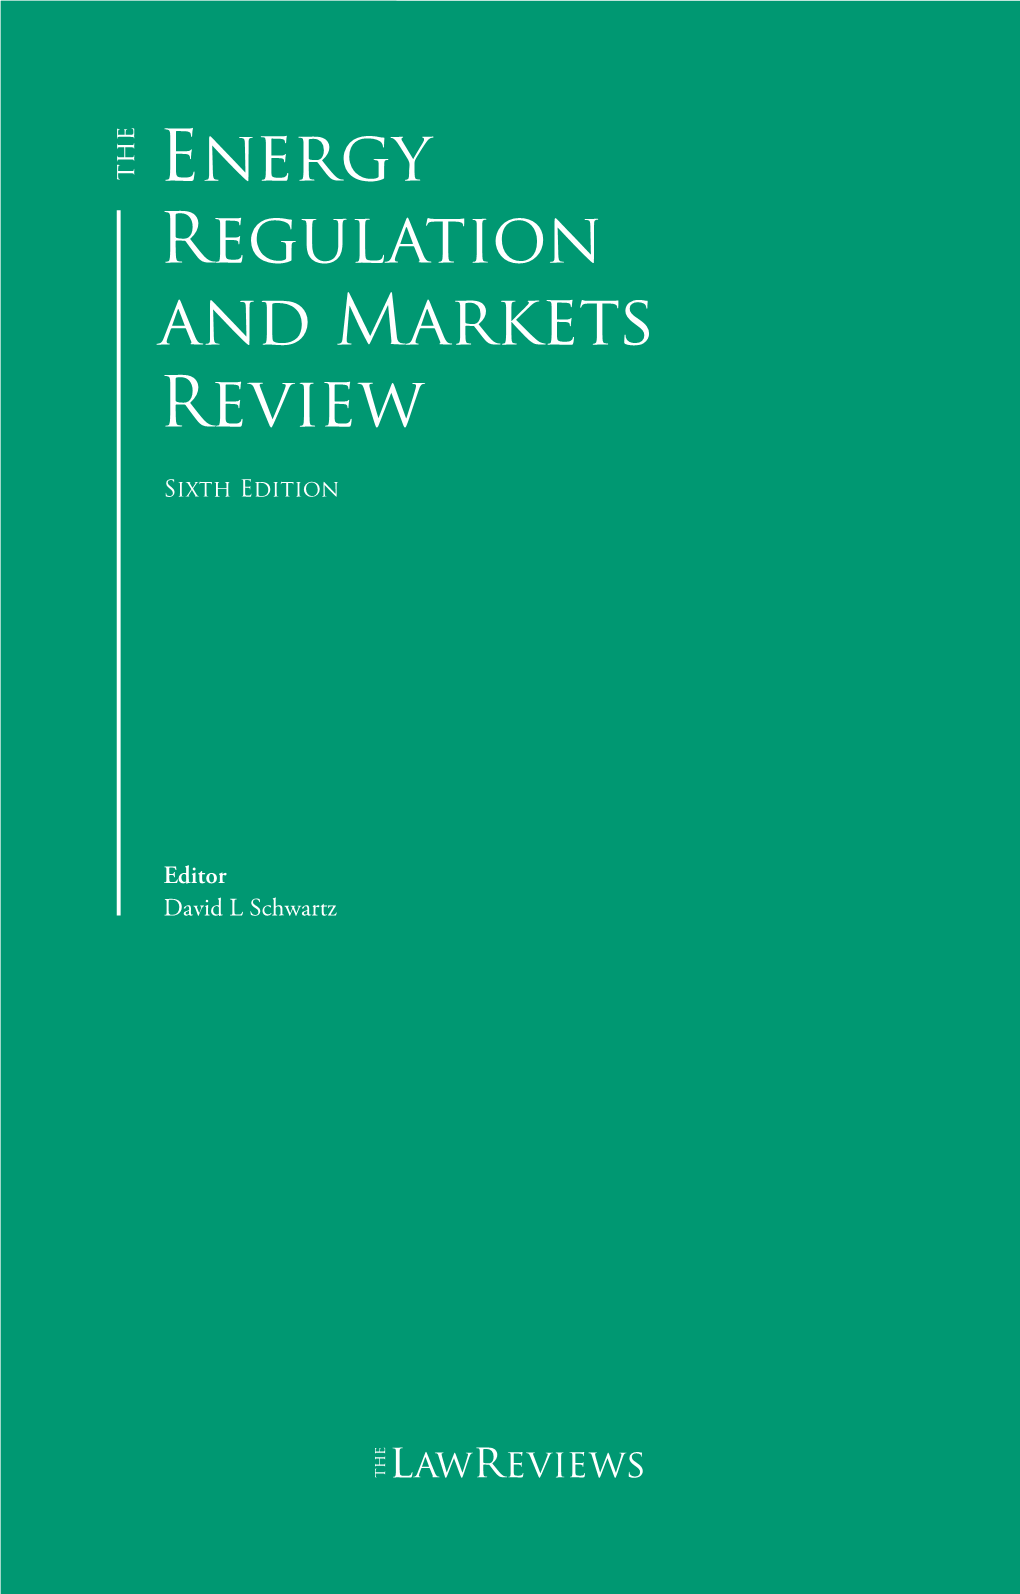 Energy Regulation and Markets Review